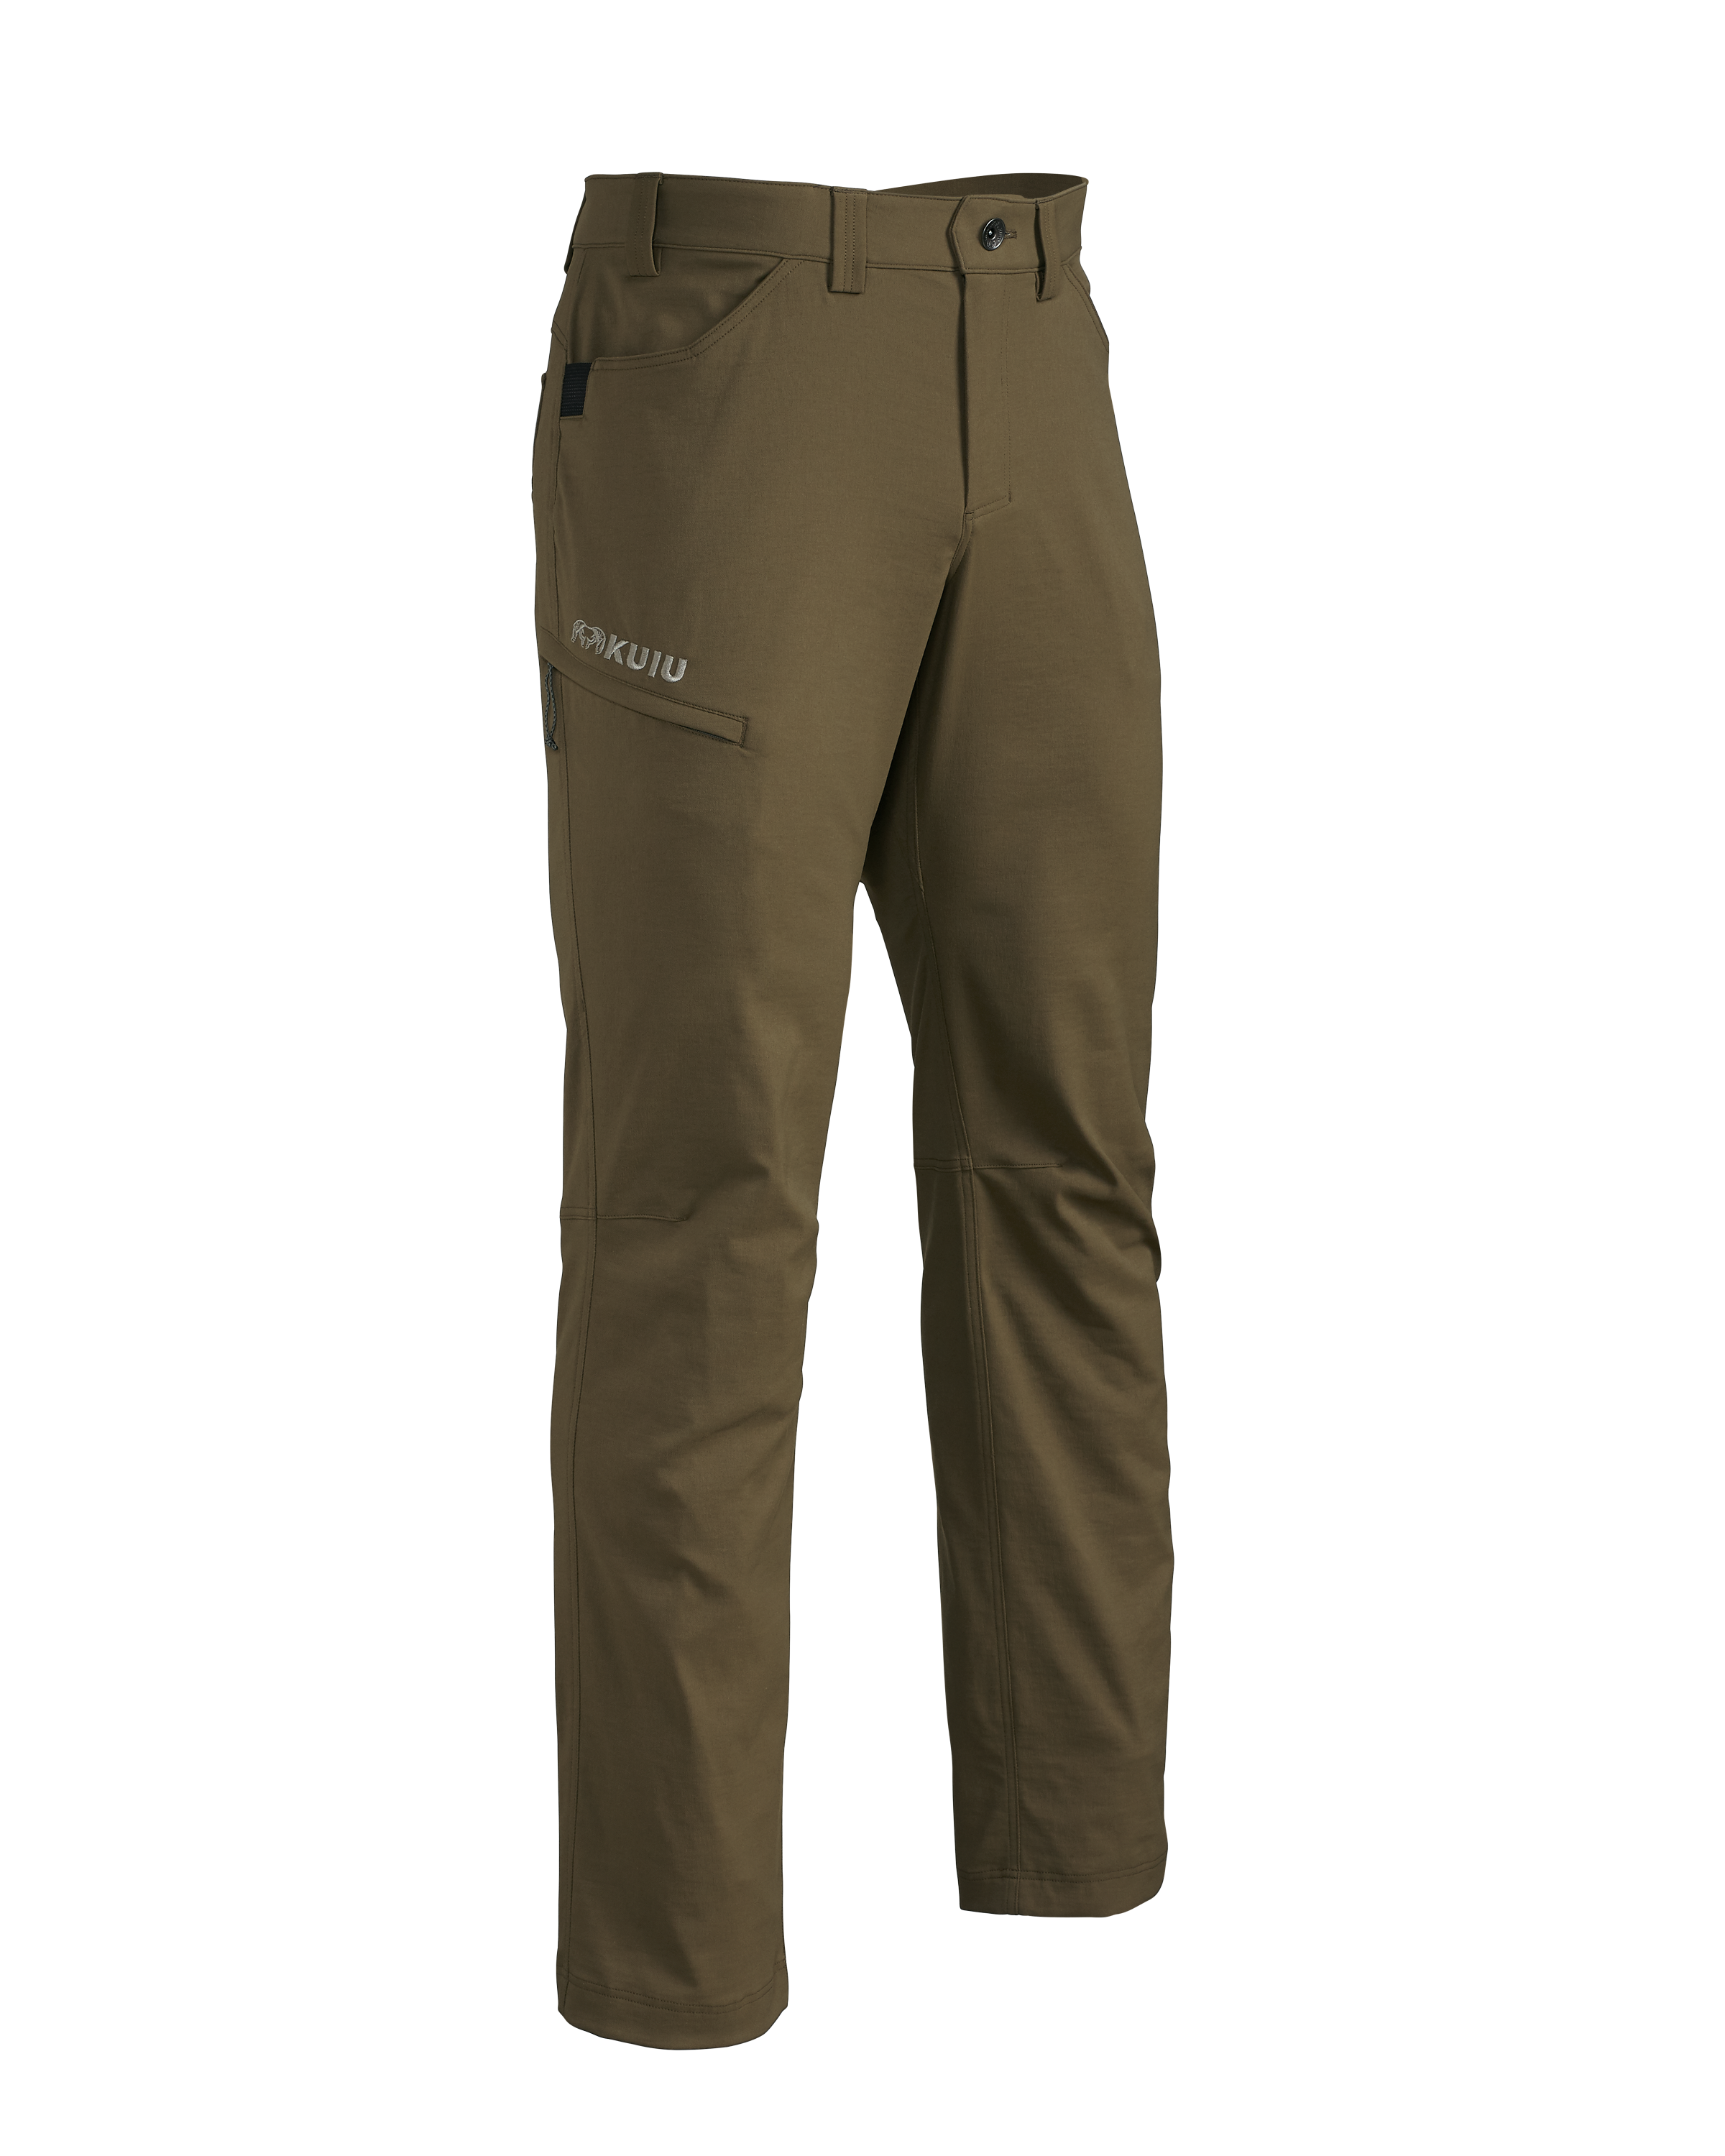 KUIU Switchback Hunting Pant in Bourbon | Size 30